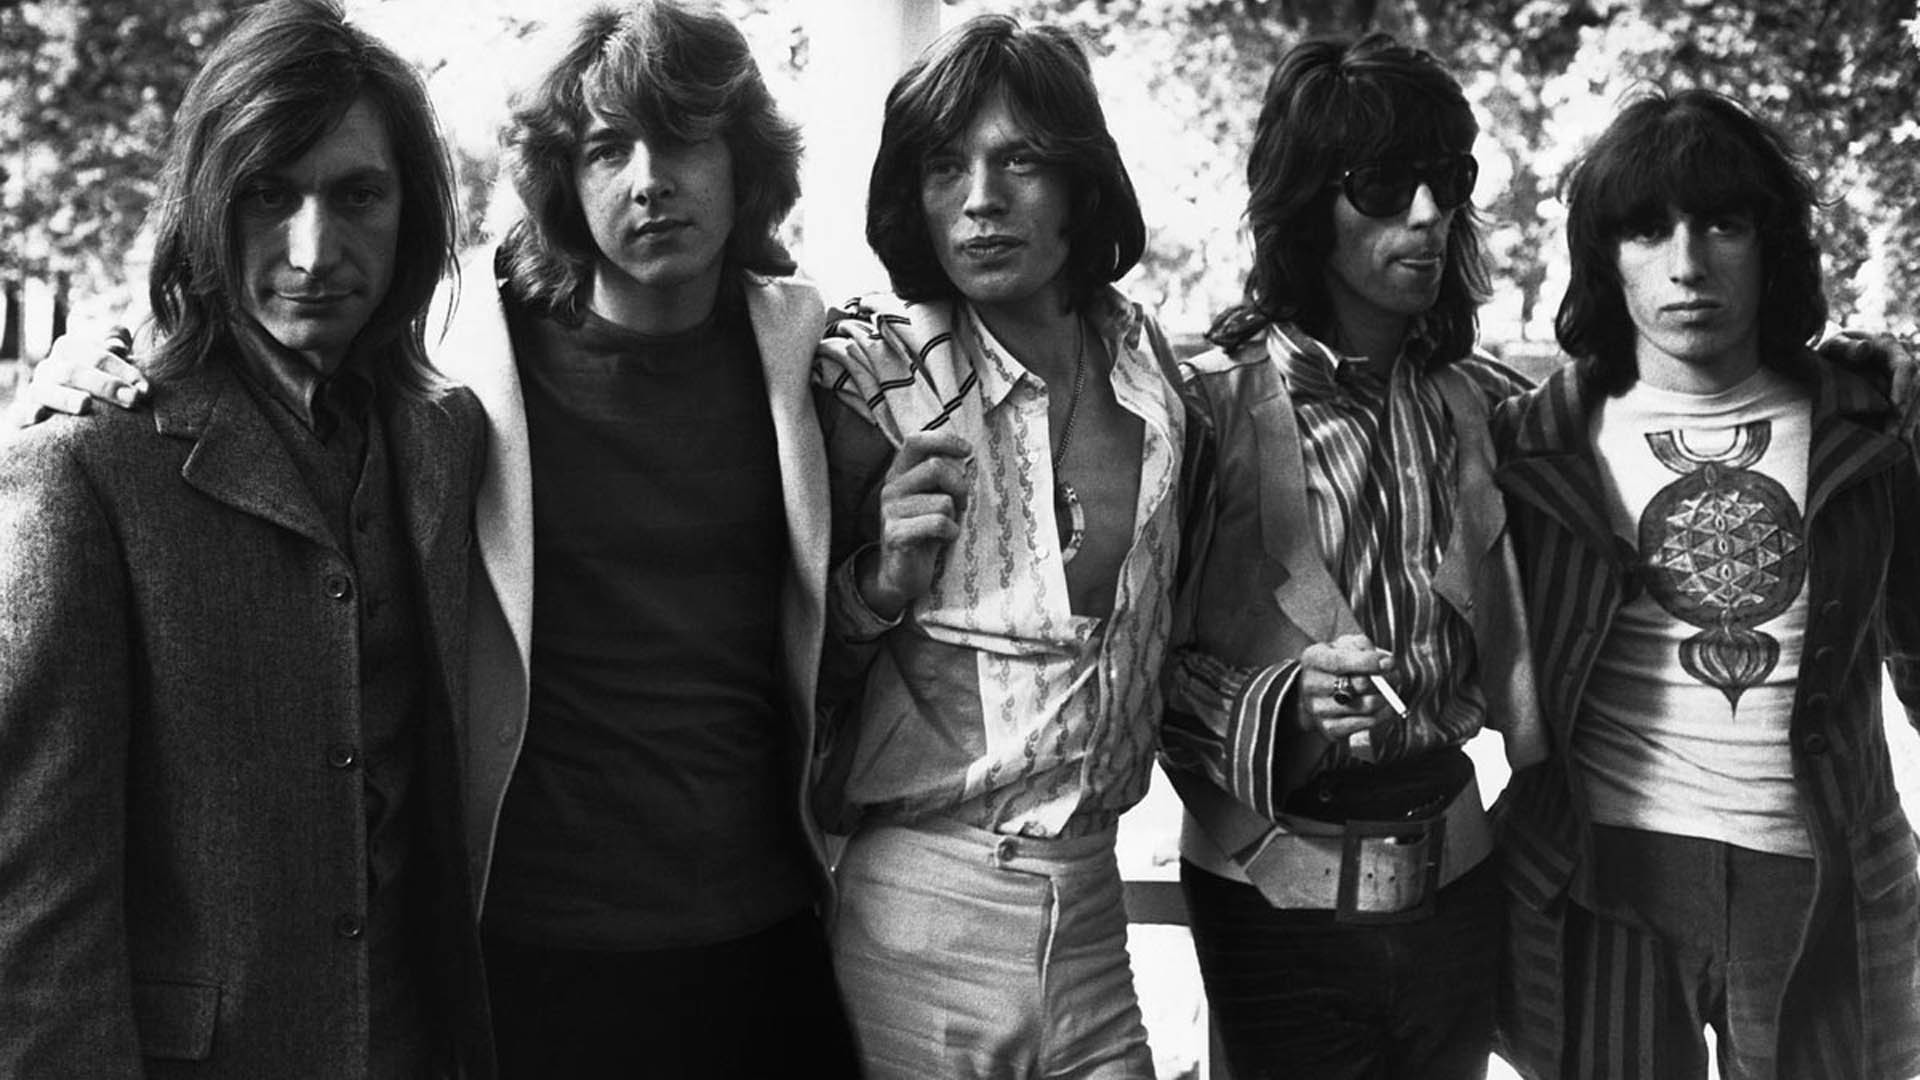 1920x1080 ... Gallery For: Rolling Stones Wallpaper Screensavers, Rolling Stones ...  The ...